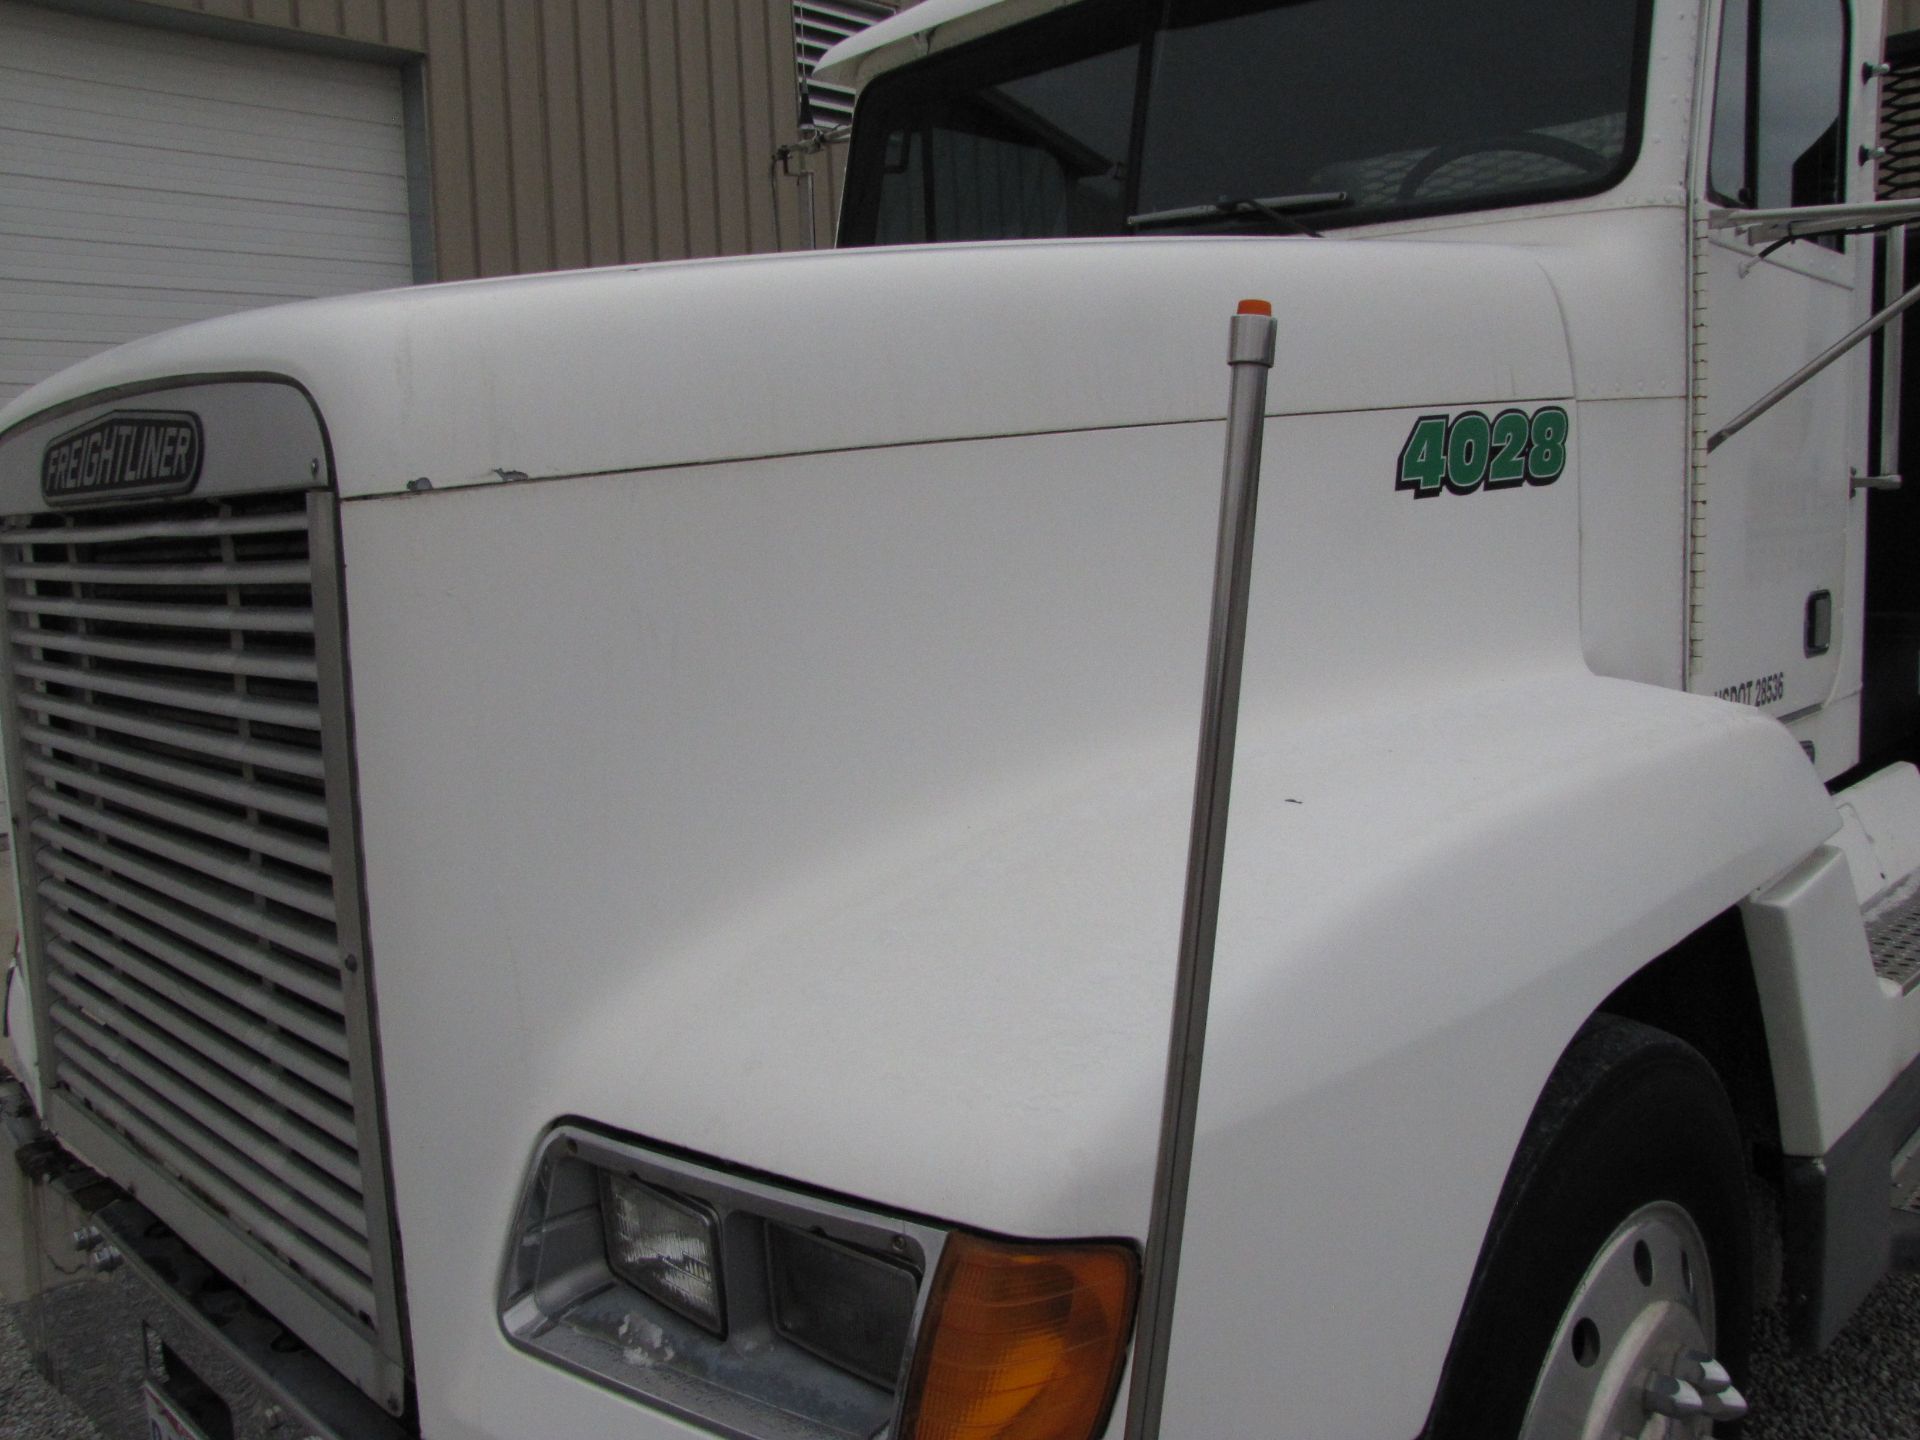 1993 Freightliner FLD120 semi truck - Image 17 of 71